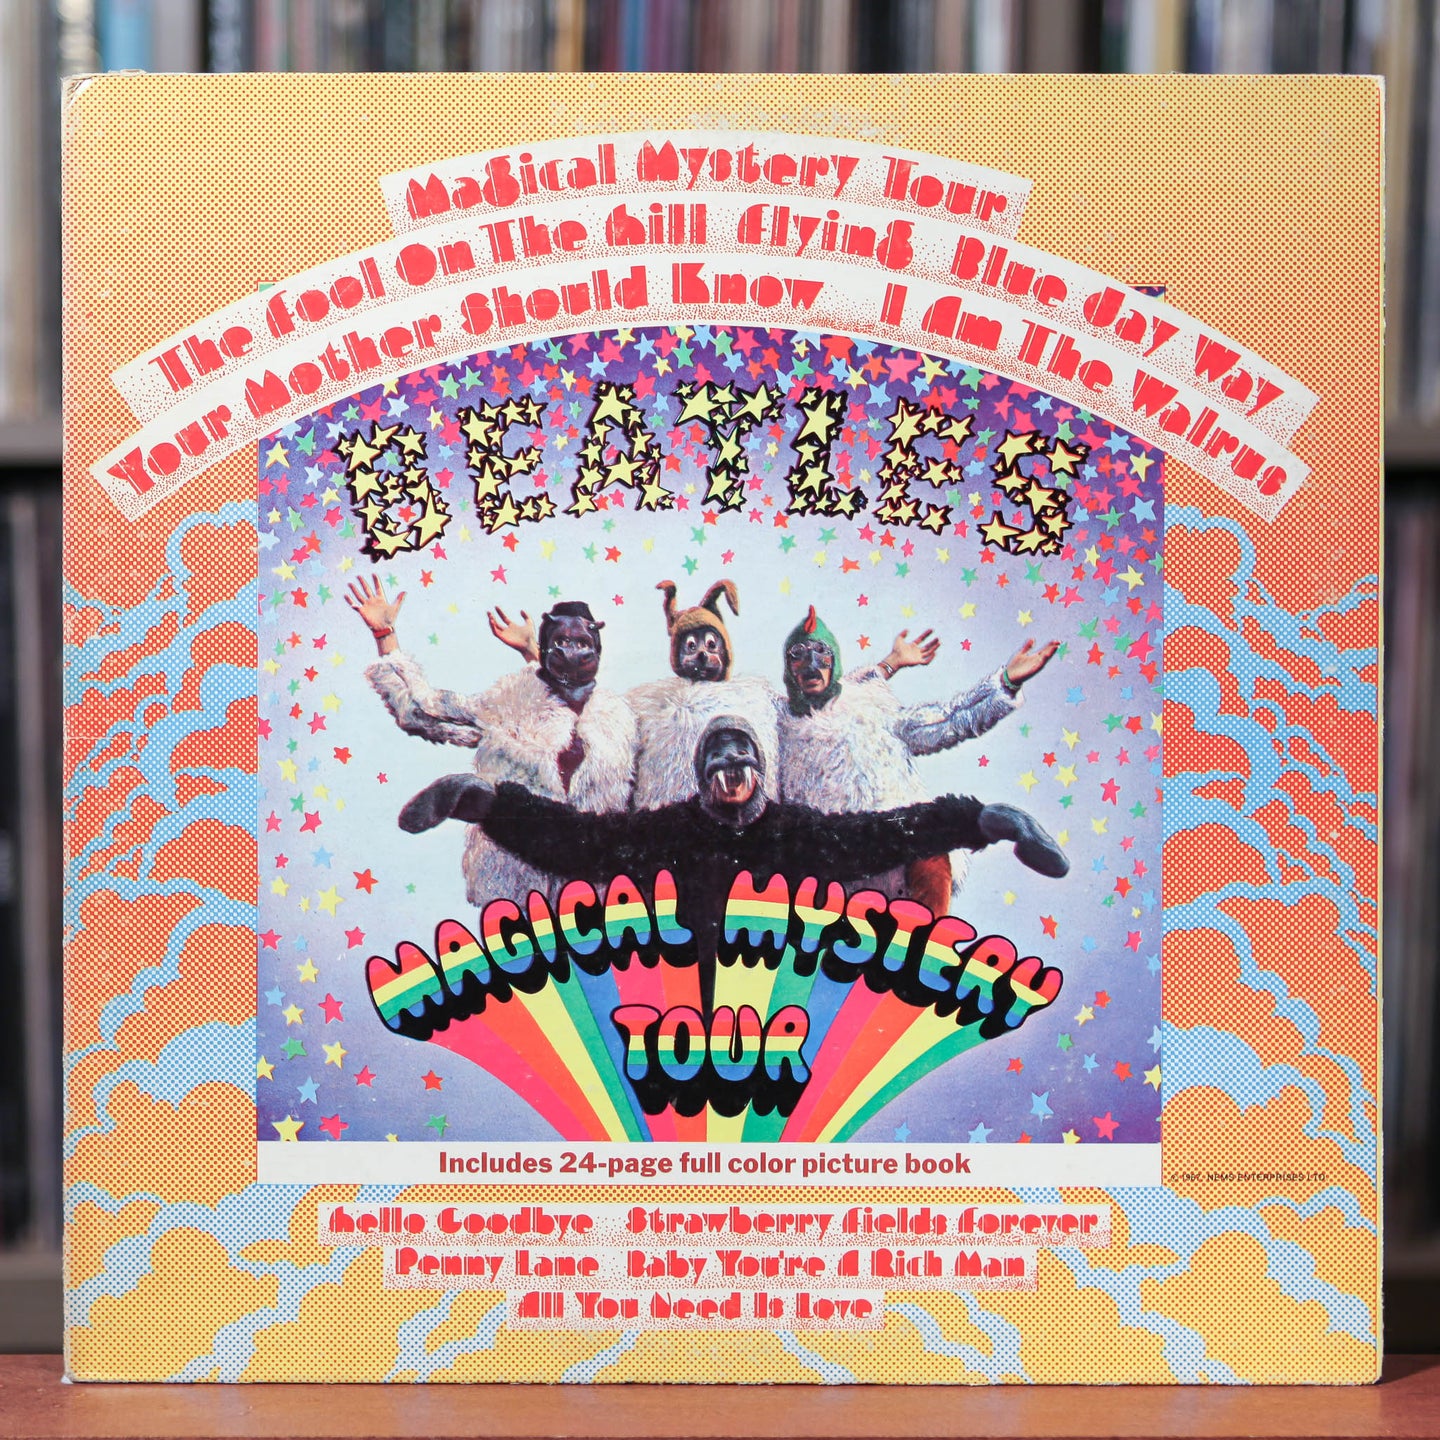 The Beatles - Magical Mystery Tour - 1976 Capitol, VG+/VG+